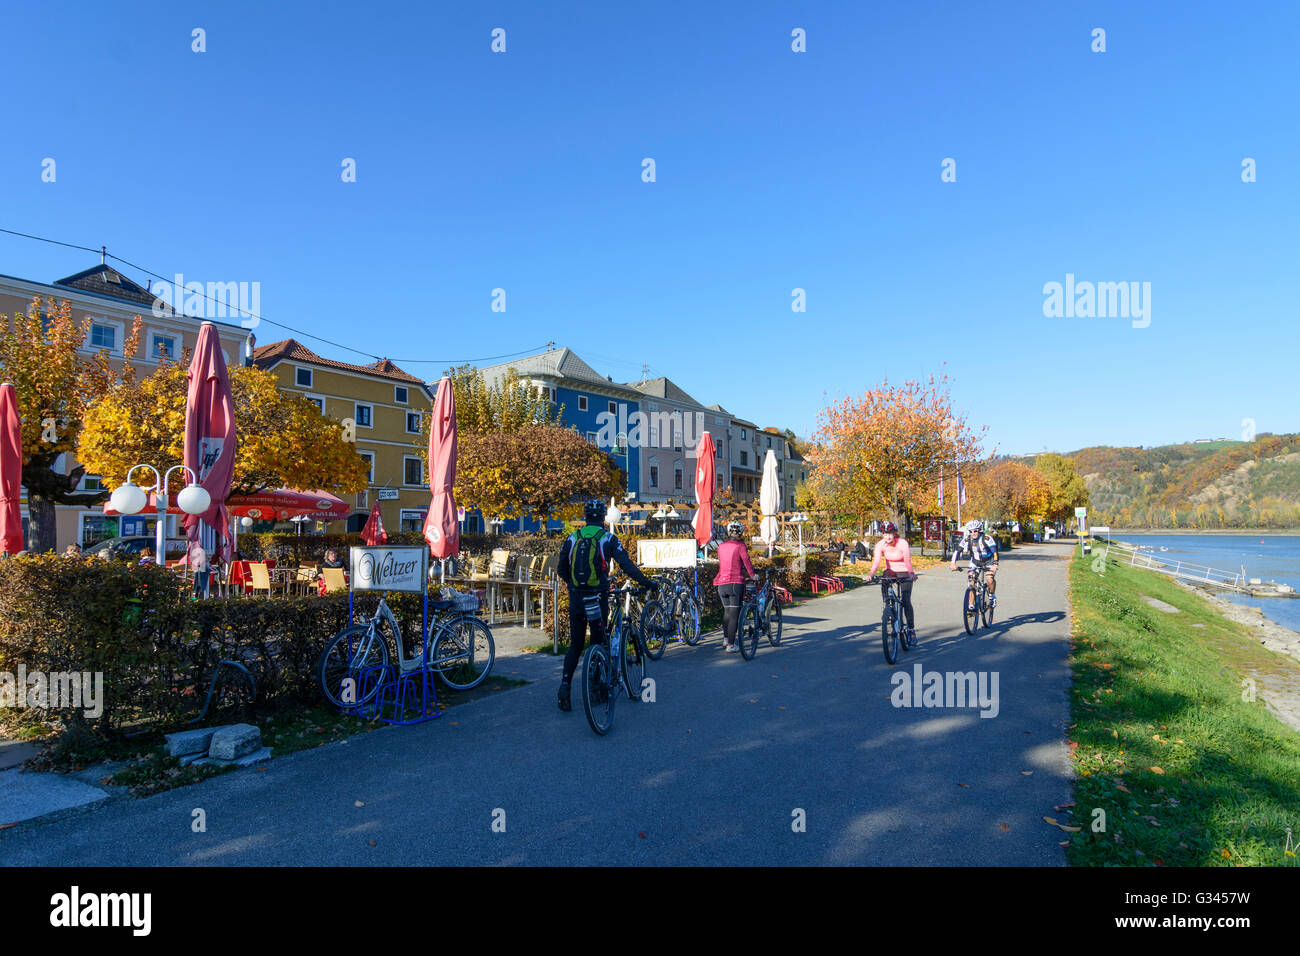 Cafe on the promenade on the Danube and cyclists, Austria, Oberösterreich, Upper Austria, , Aschach an der Donau Stock Photo